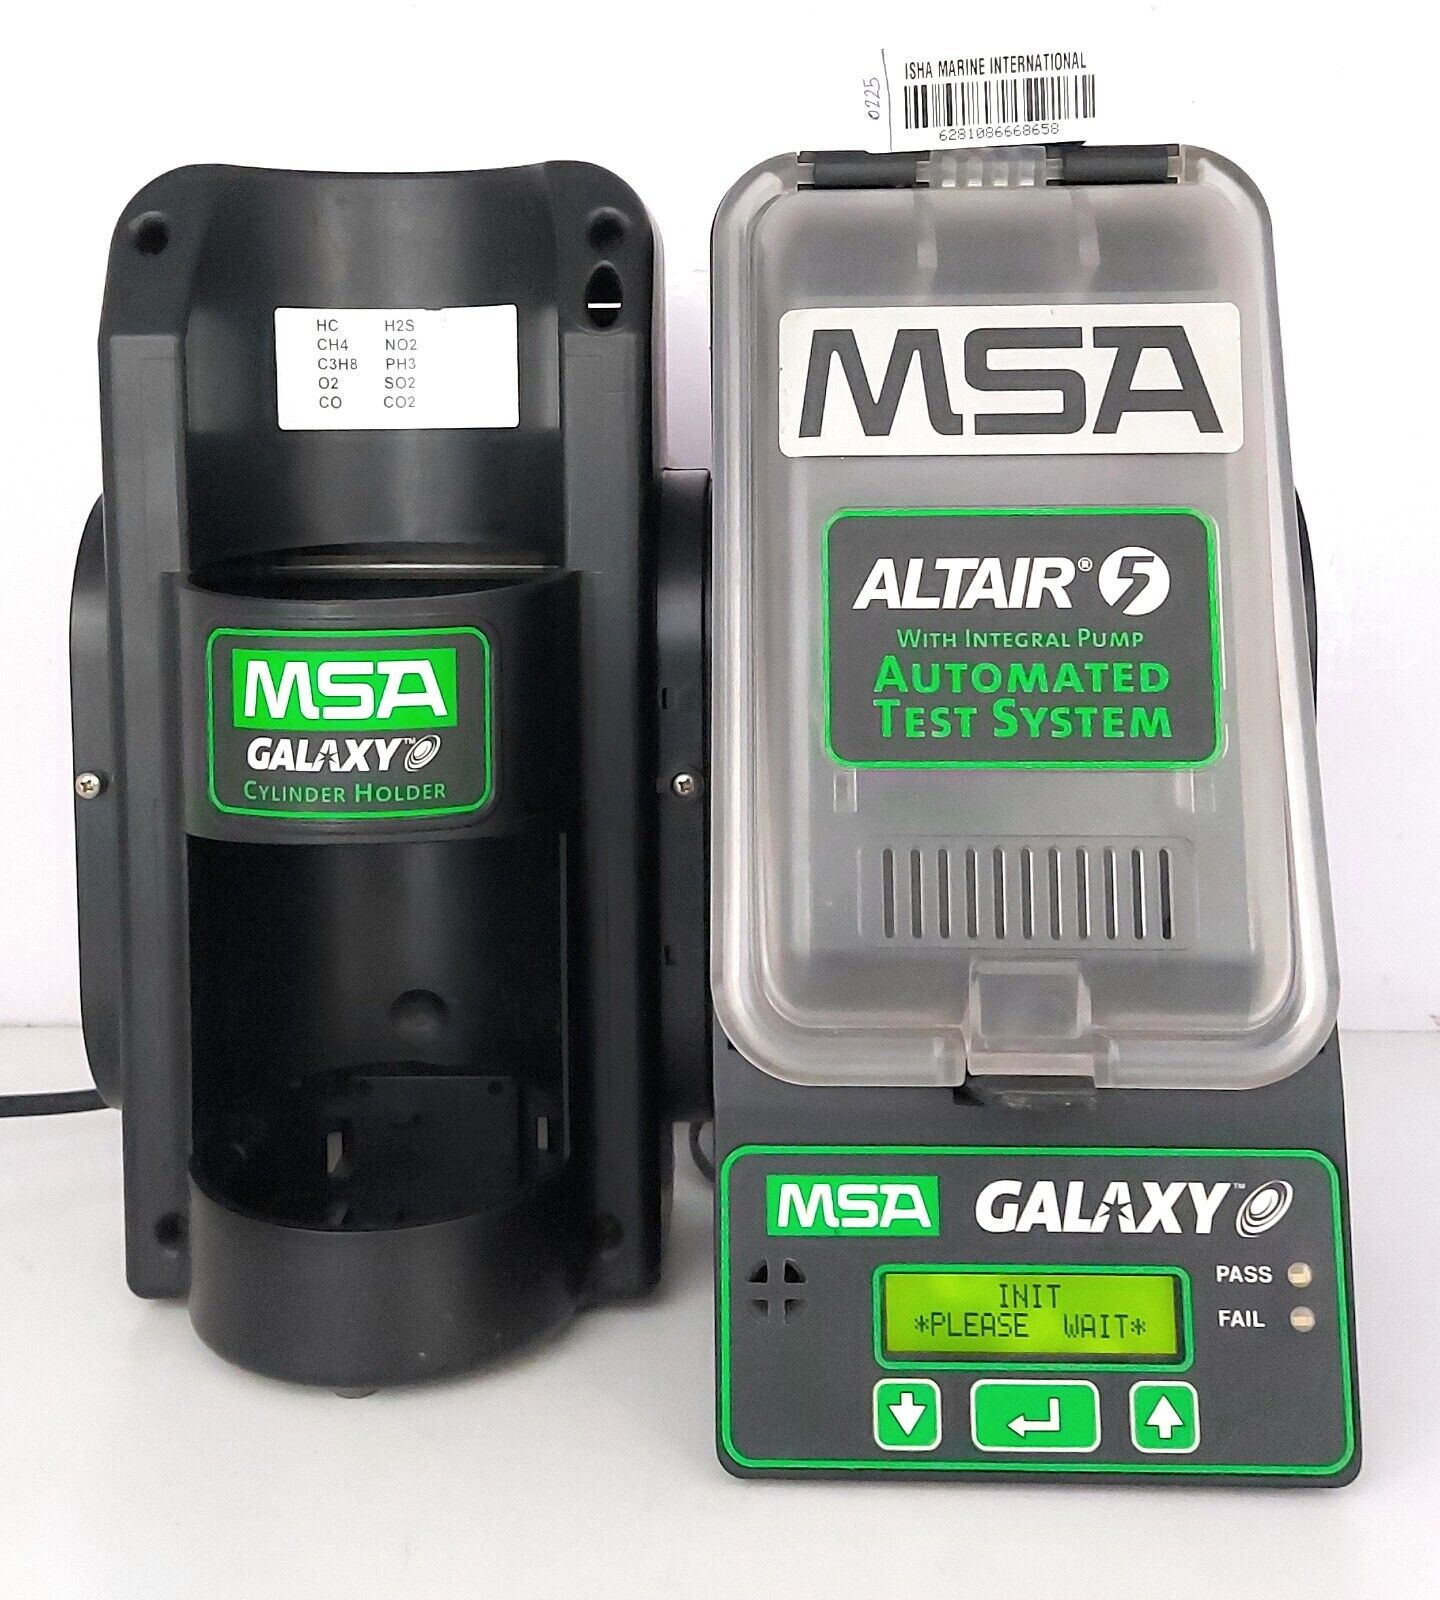 MSA Altair 5 With Integral Pump Automated Test System 0225